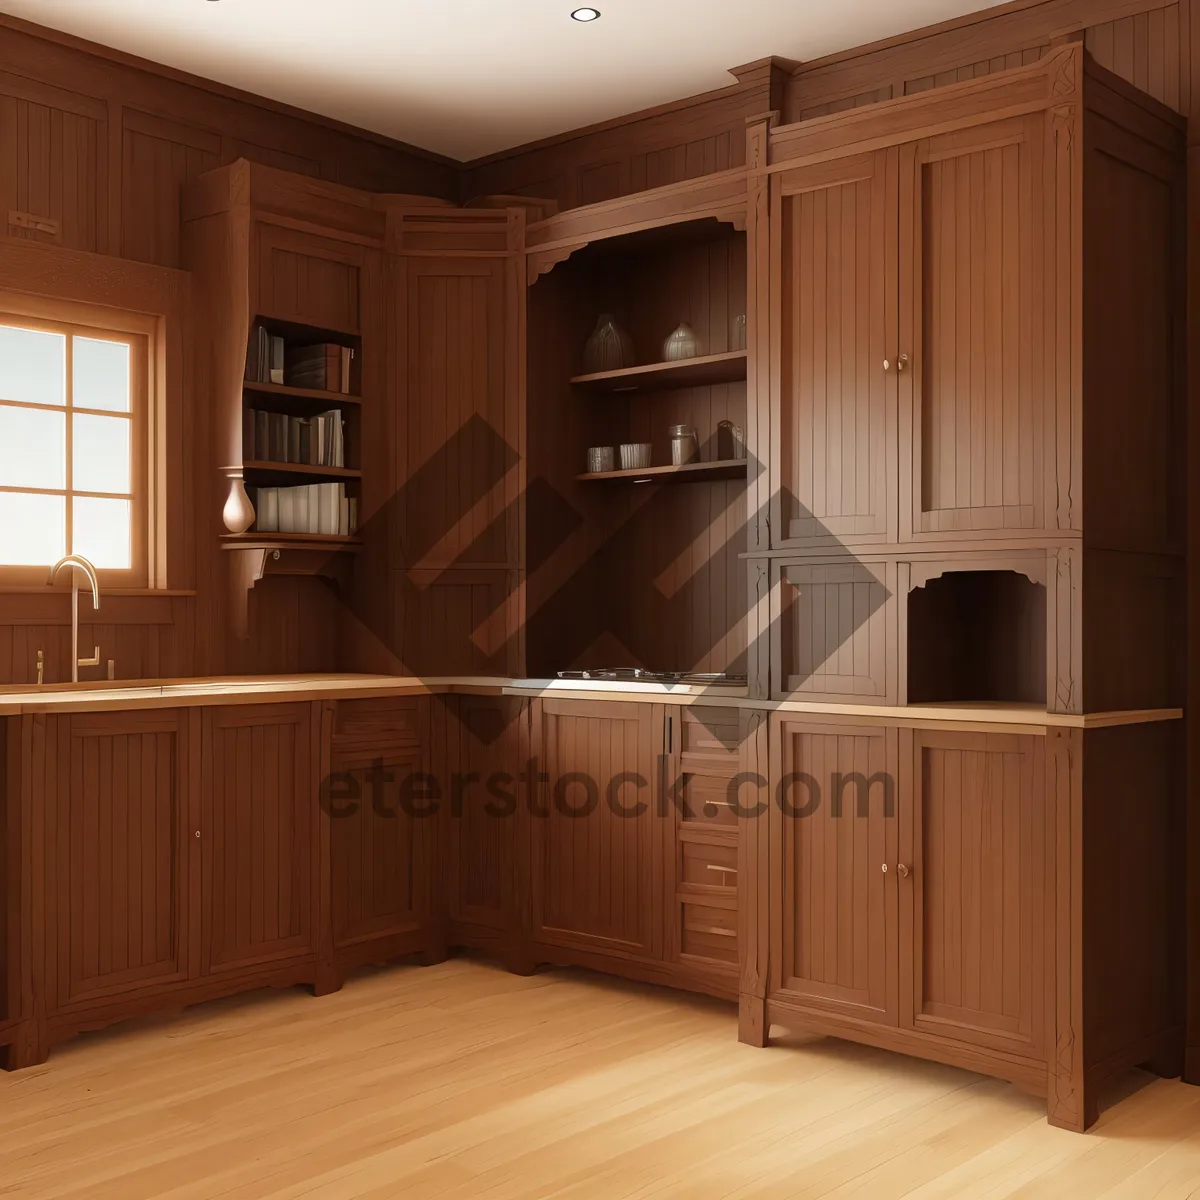 Picture of Modern Wood Kitchen Table with Stylish Design